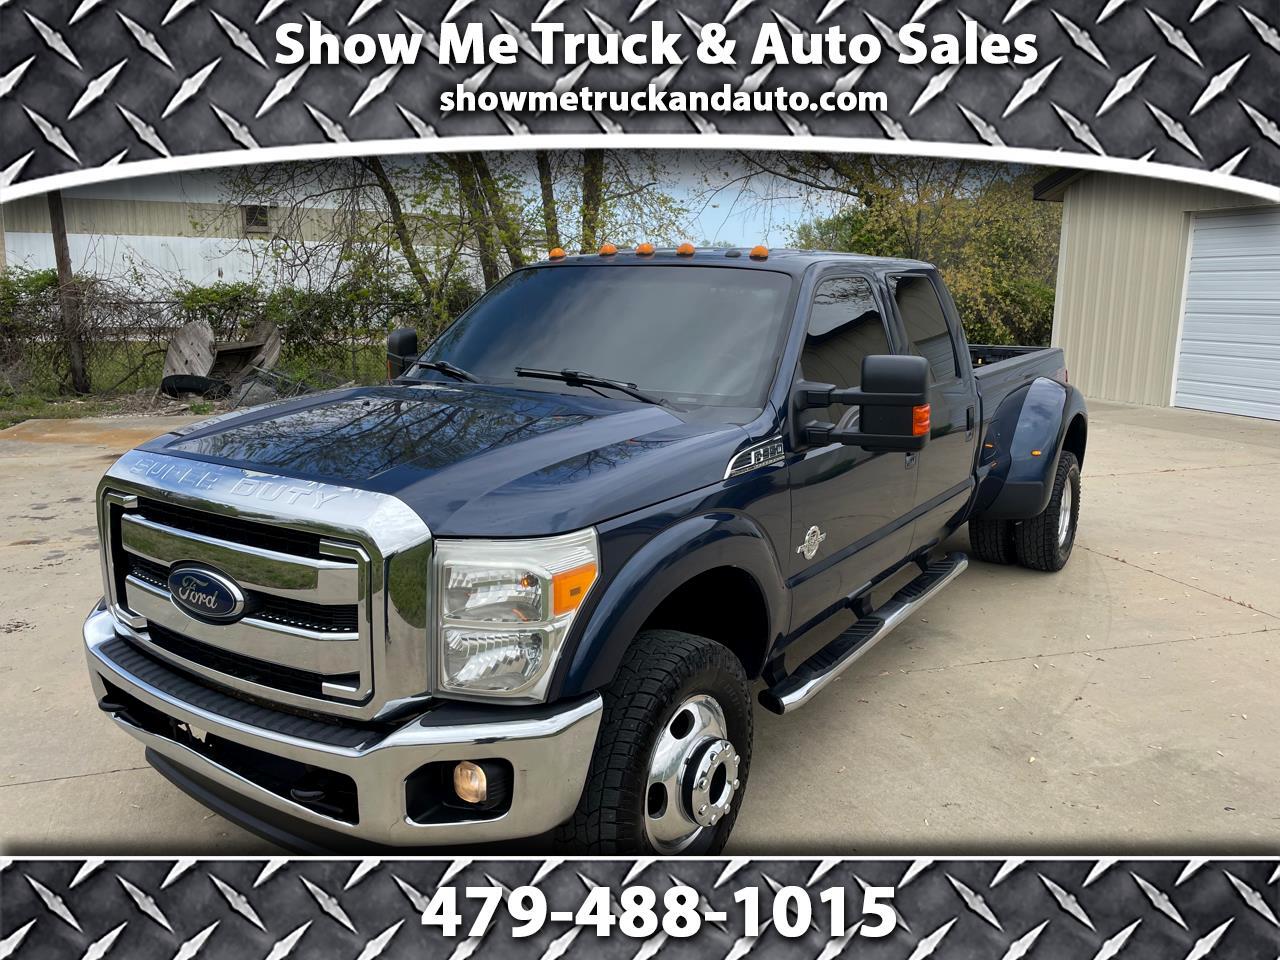 2013 Ford F-350 SD Lariat Crew Cab Long Bed DRW 4WD